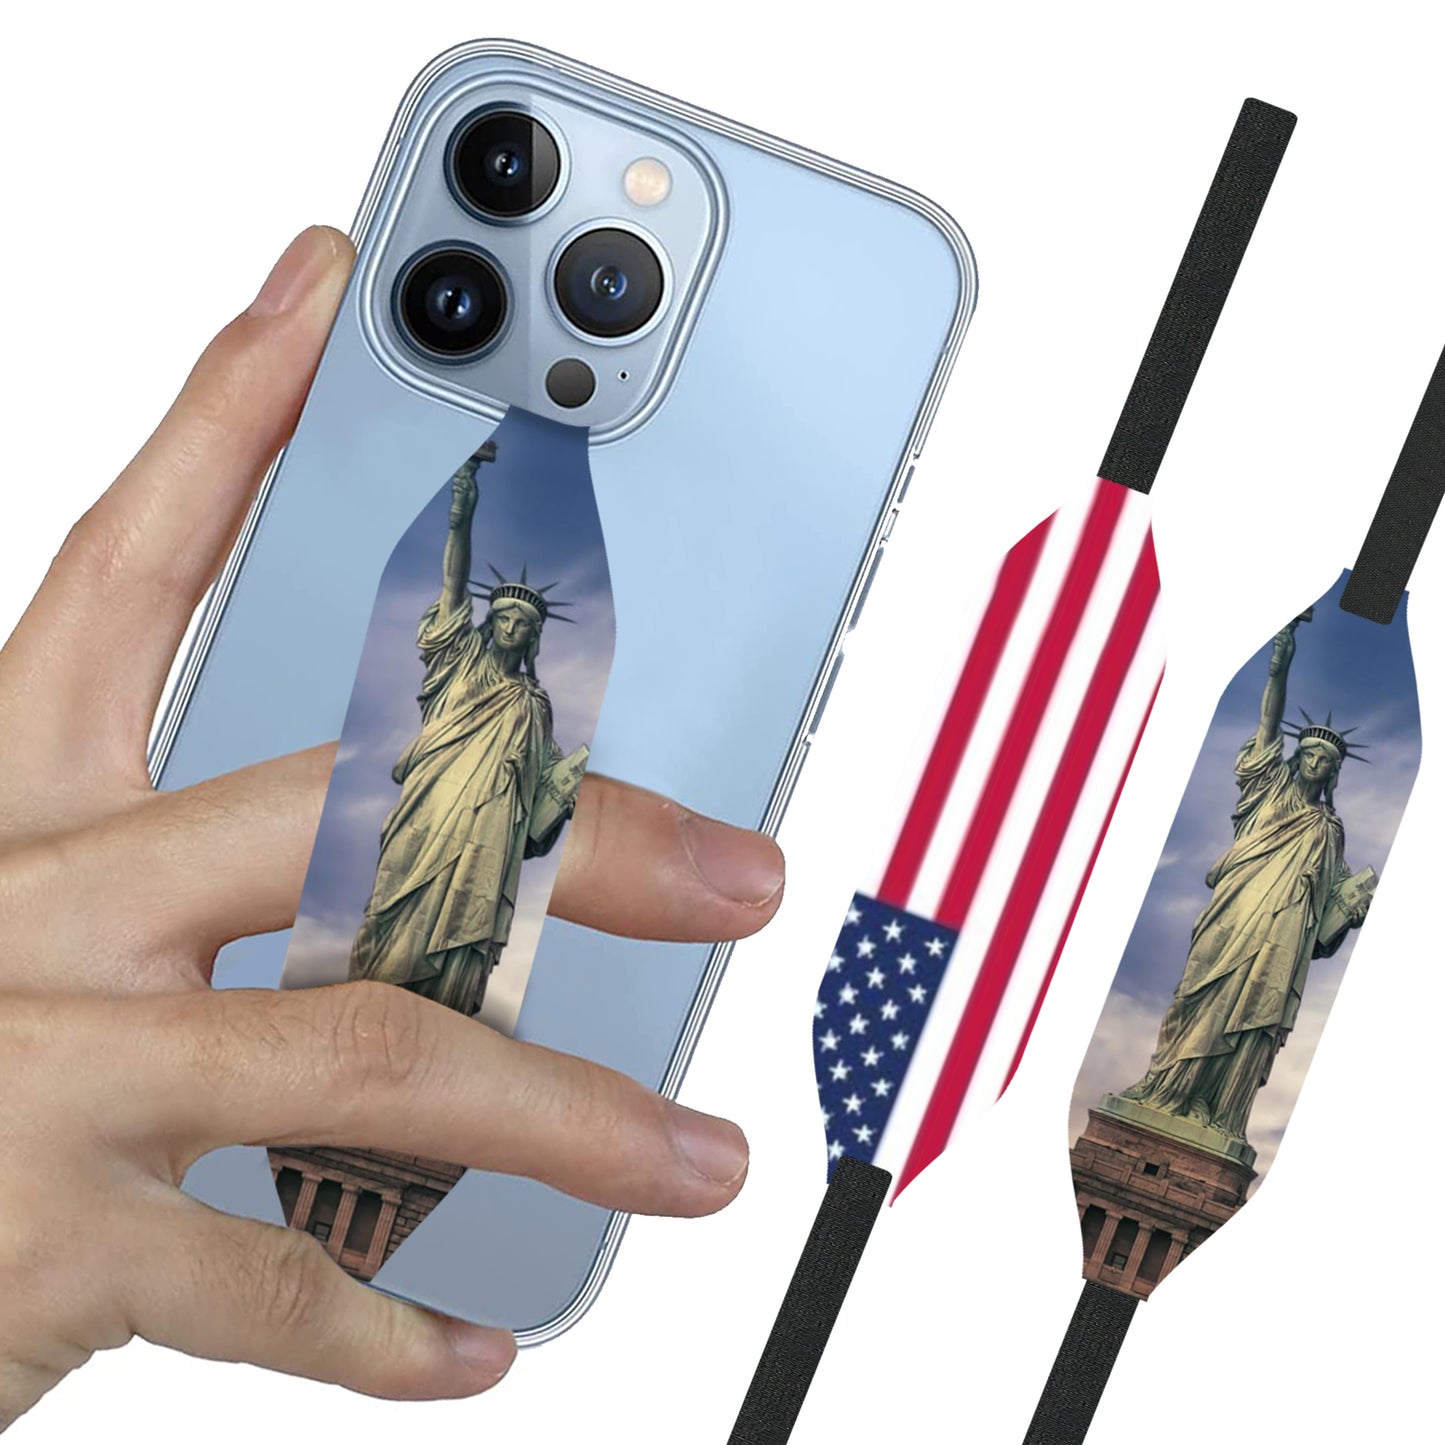 SwitchBands Universal Phone Grip Strap For Phone Cases As Phone Loop Holder, Phone Charms - USA Flag & Statue Of Liberty